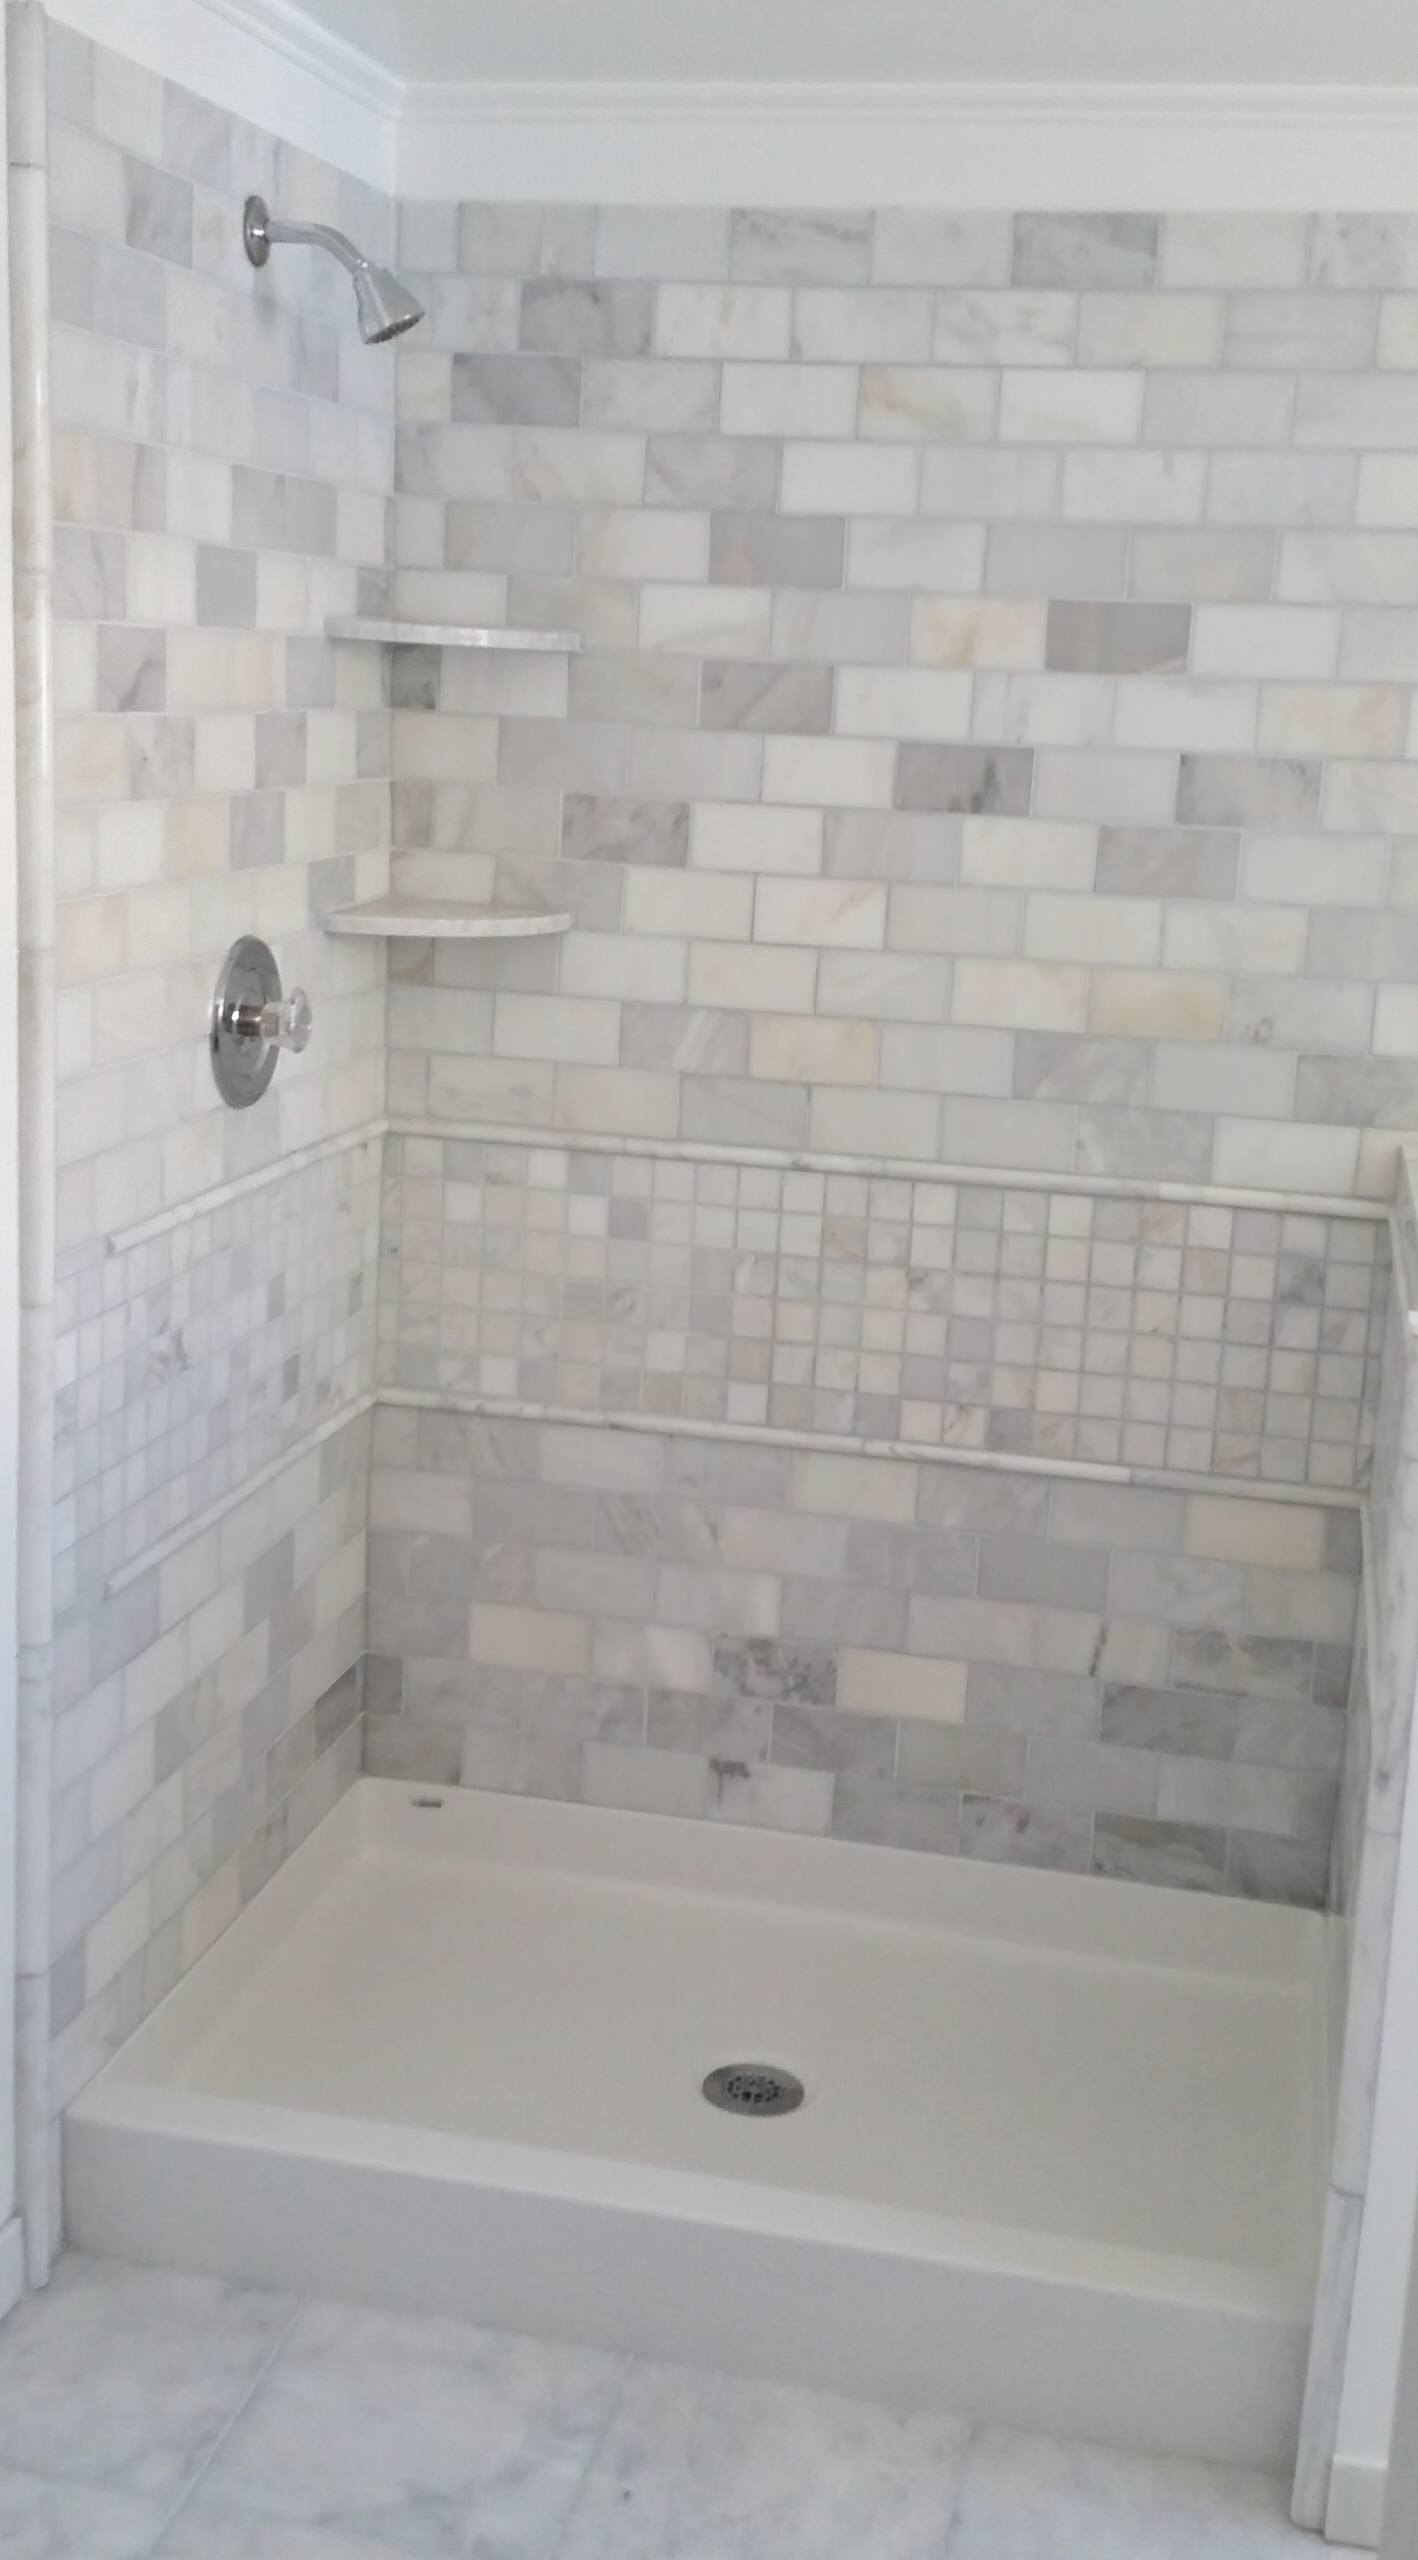 Bestbath Shower Pan Low Threshold, How To Install A Tile Ready Shower Base